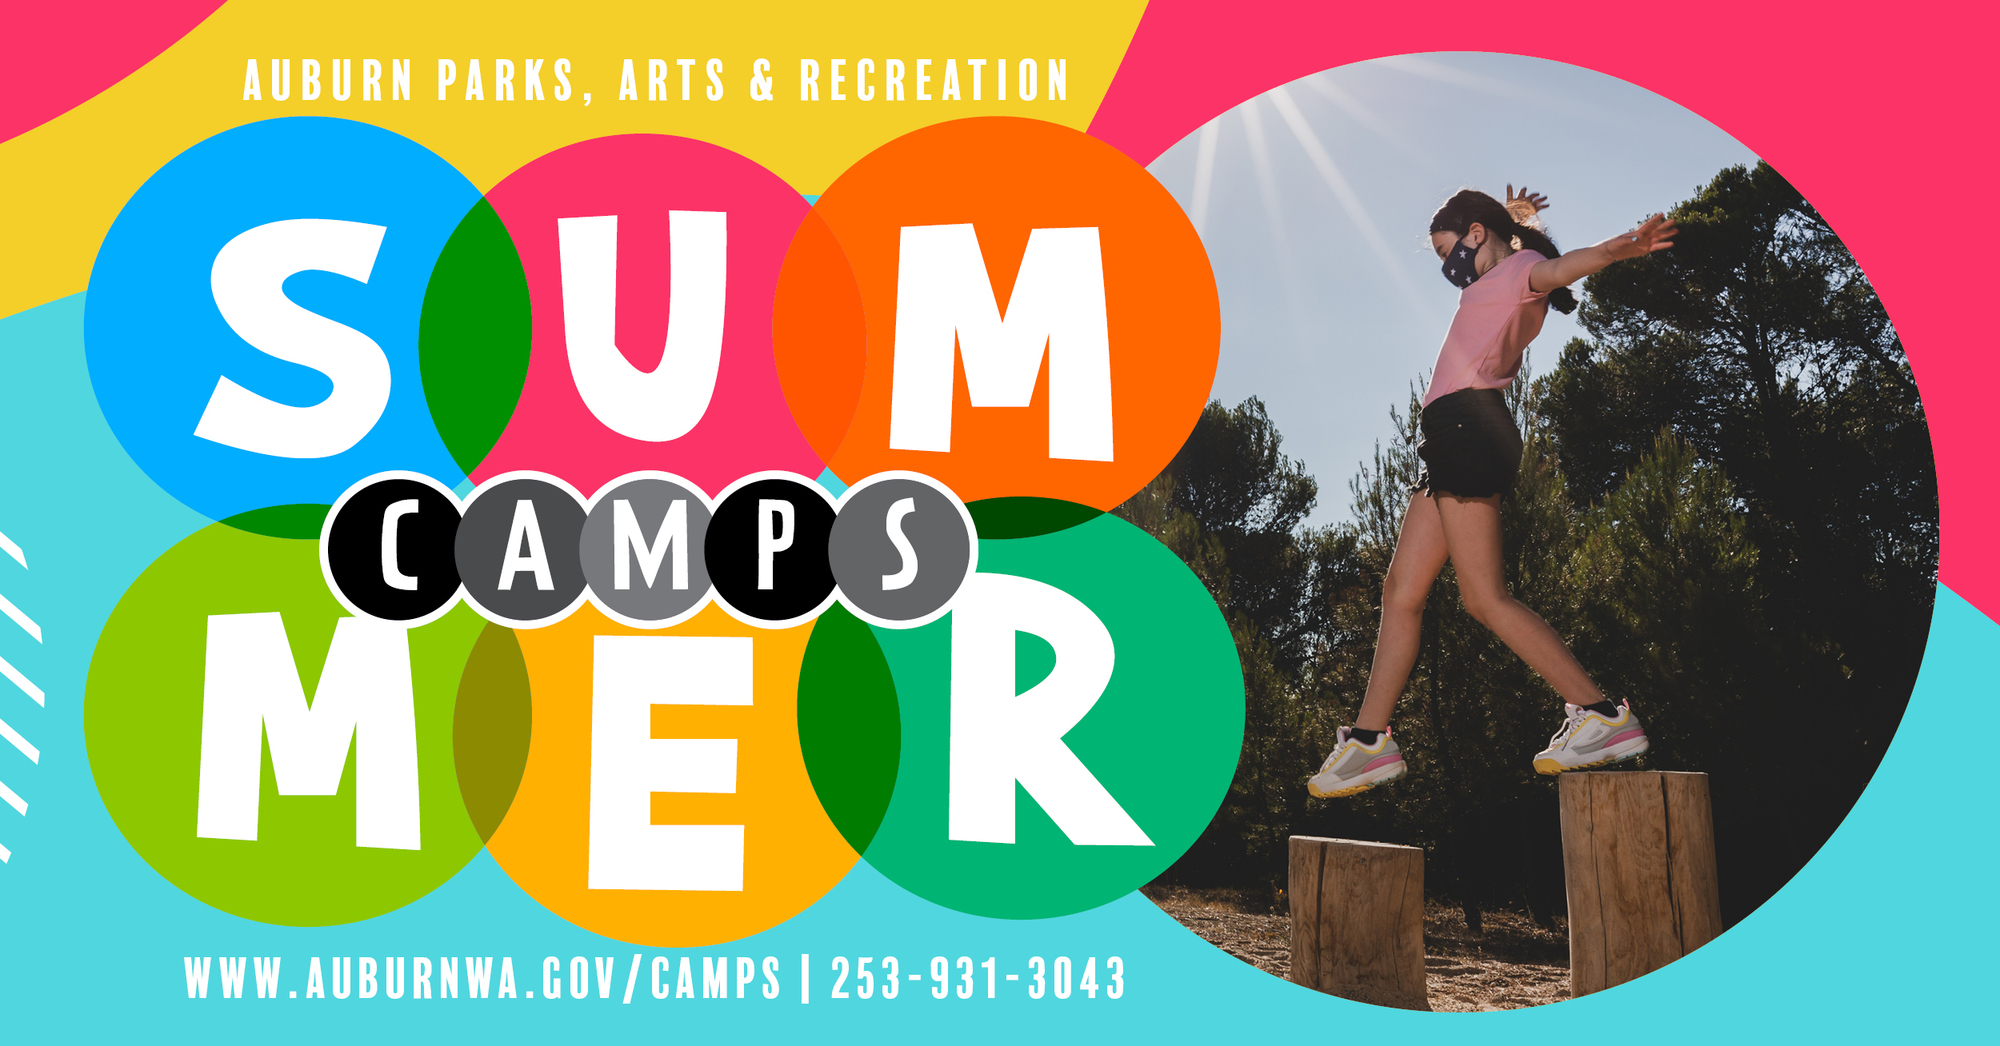 Summer camp options with Auburn Parks, Arts & Recreation